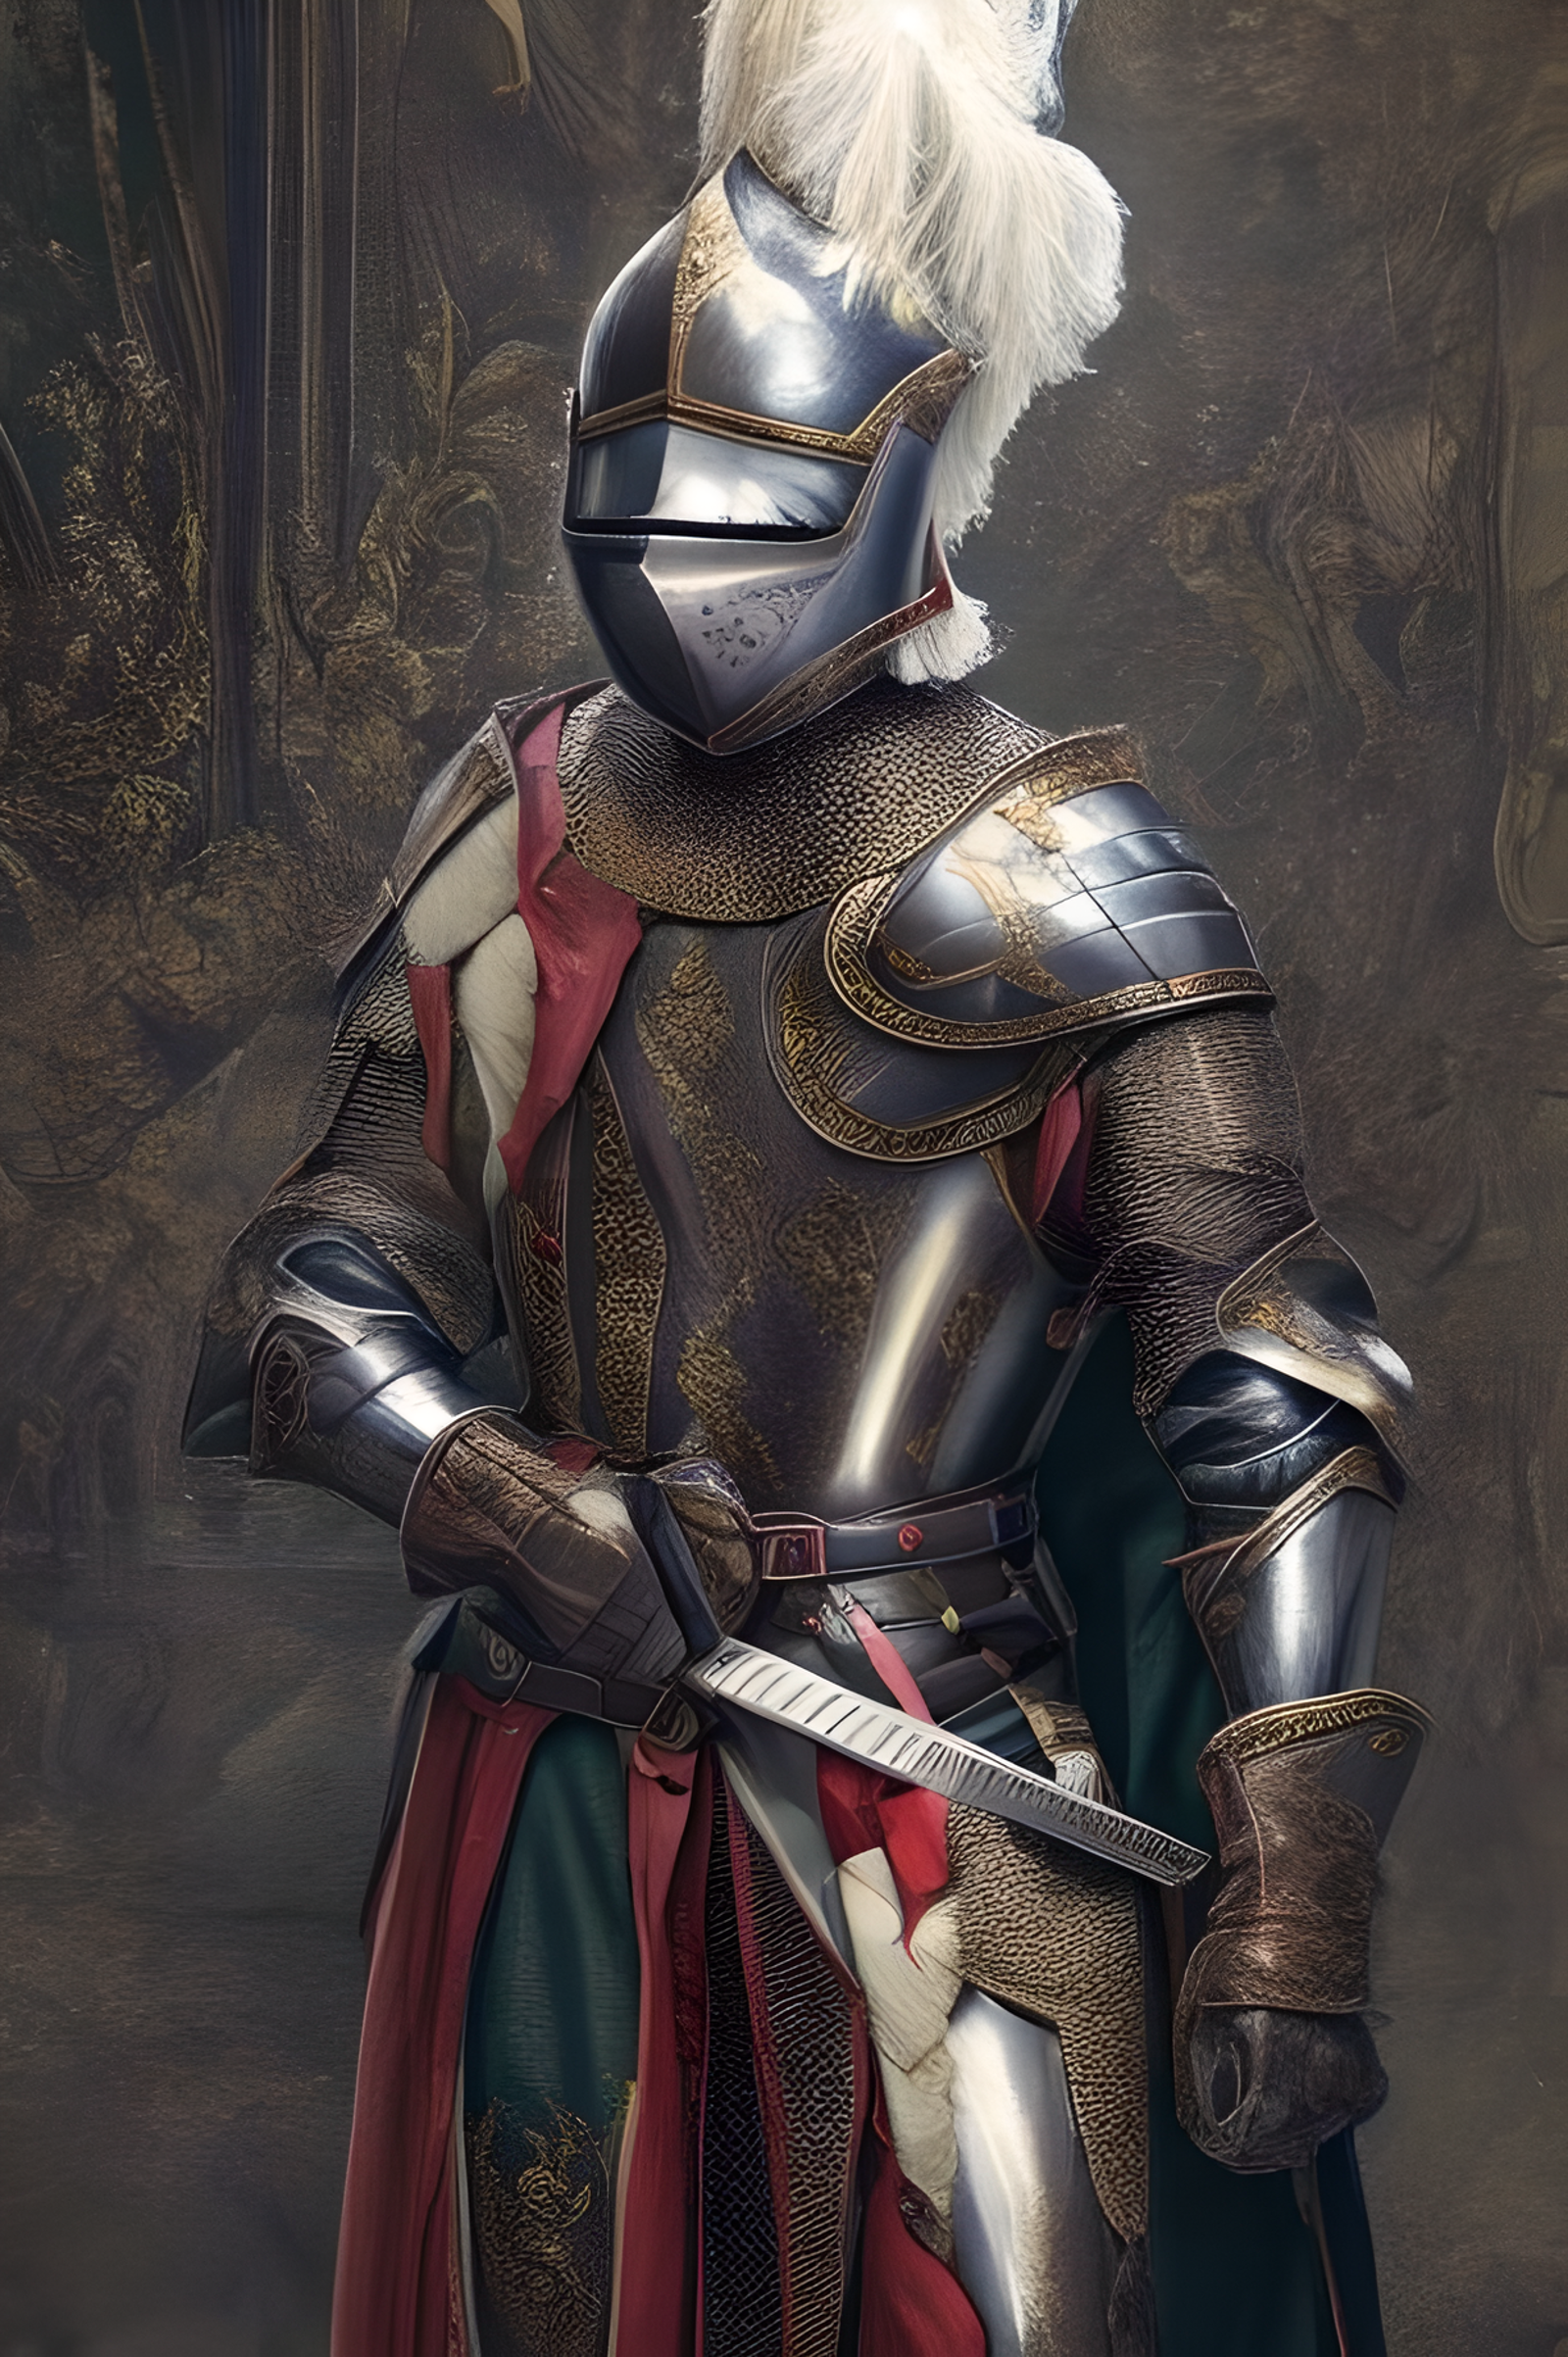 A Knight in Full Armor holding a Sword.